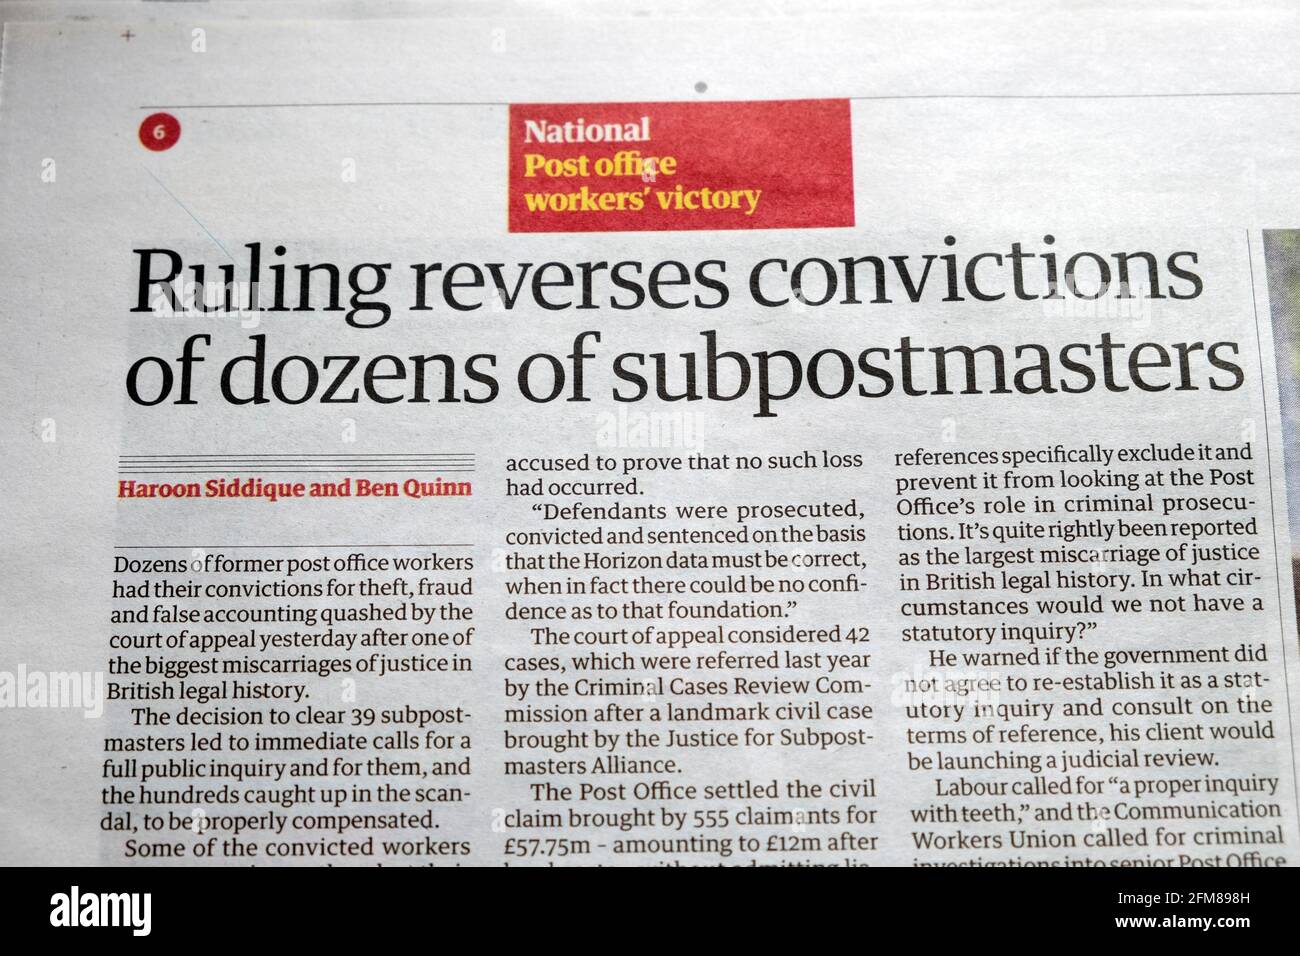 National Post office workers' victory 'Ruling reverses convictions of dozens of subpostmasters' Guardian newspaper theft fraud scandal article UK 2021 Stock Photo